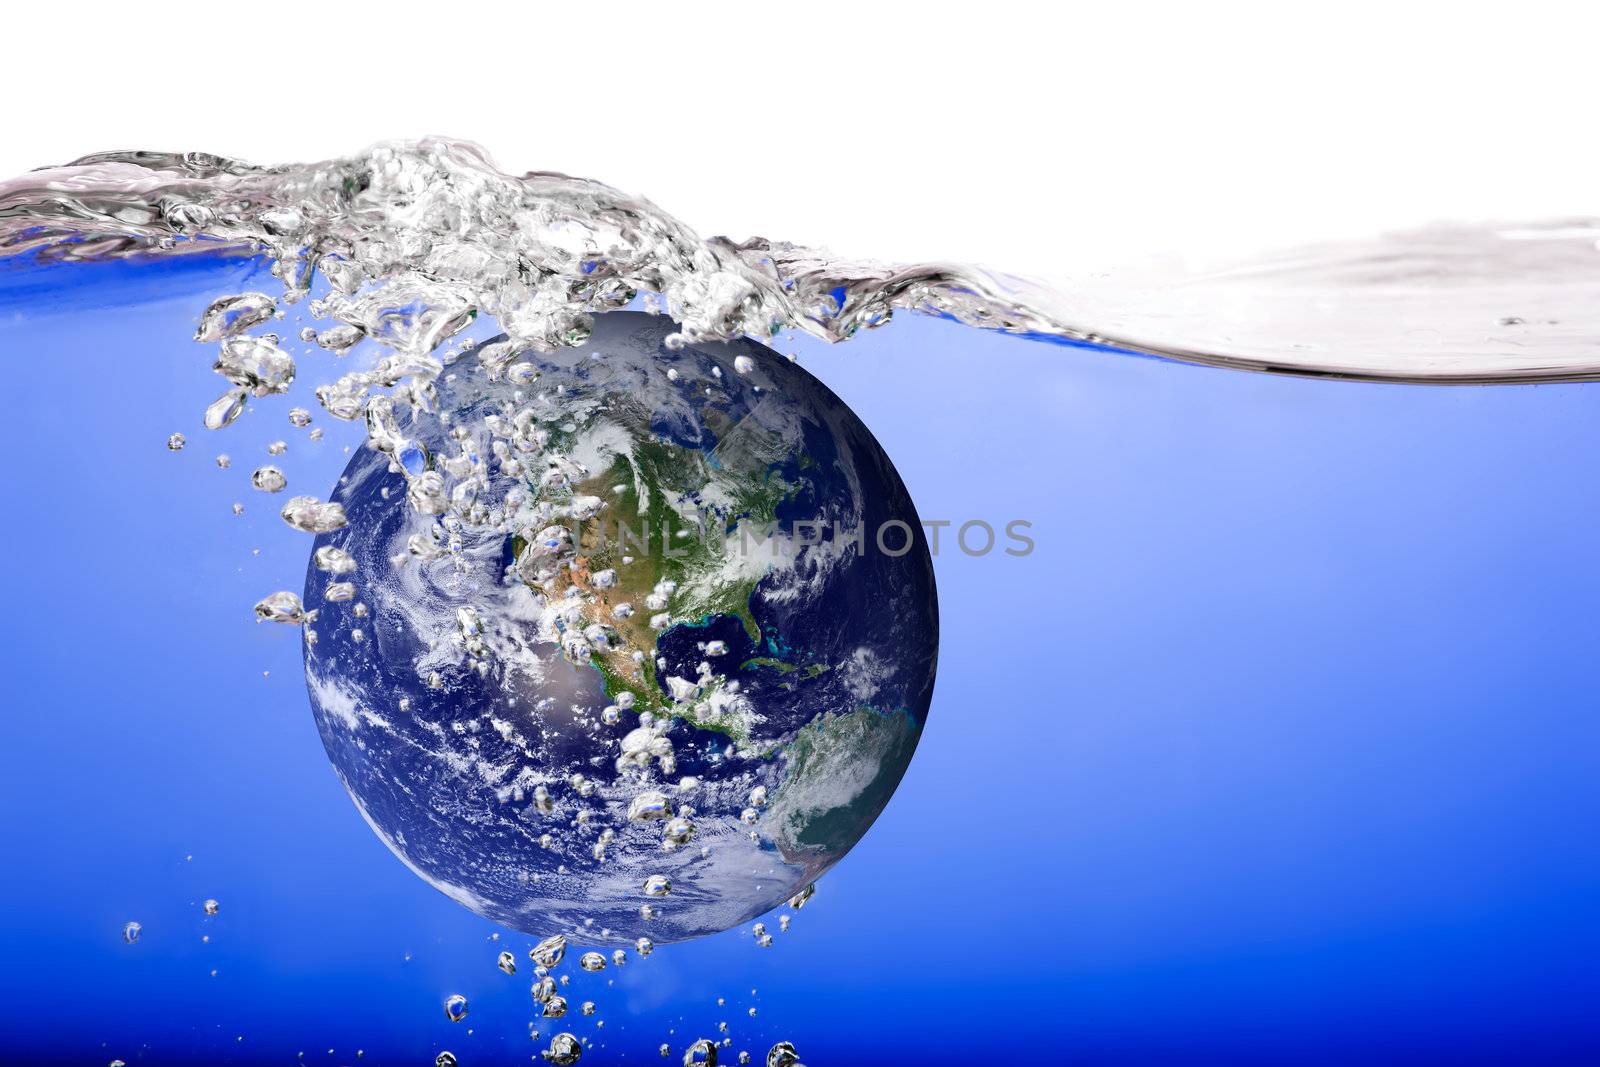 The world drowning in water and bubbles